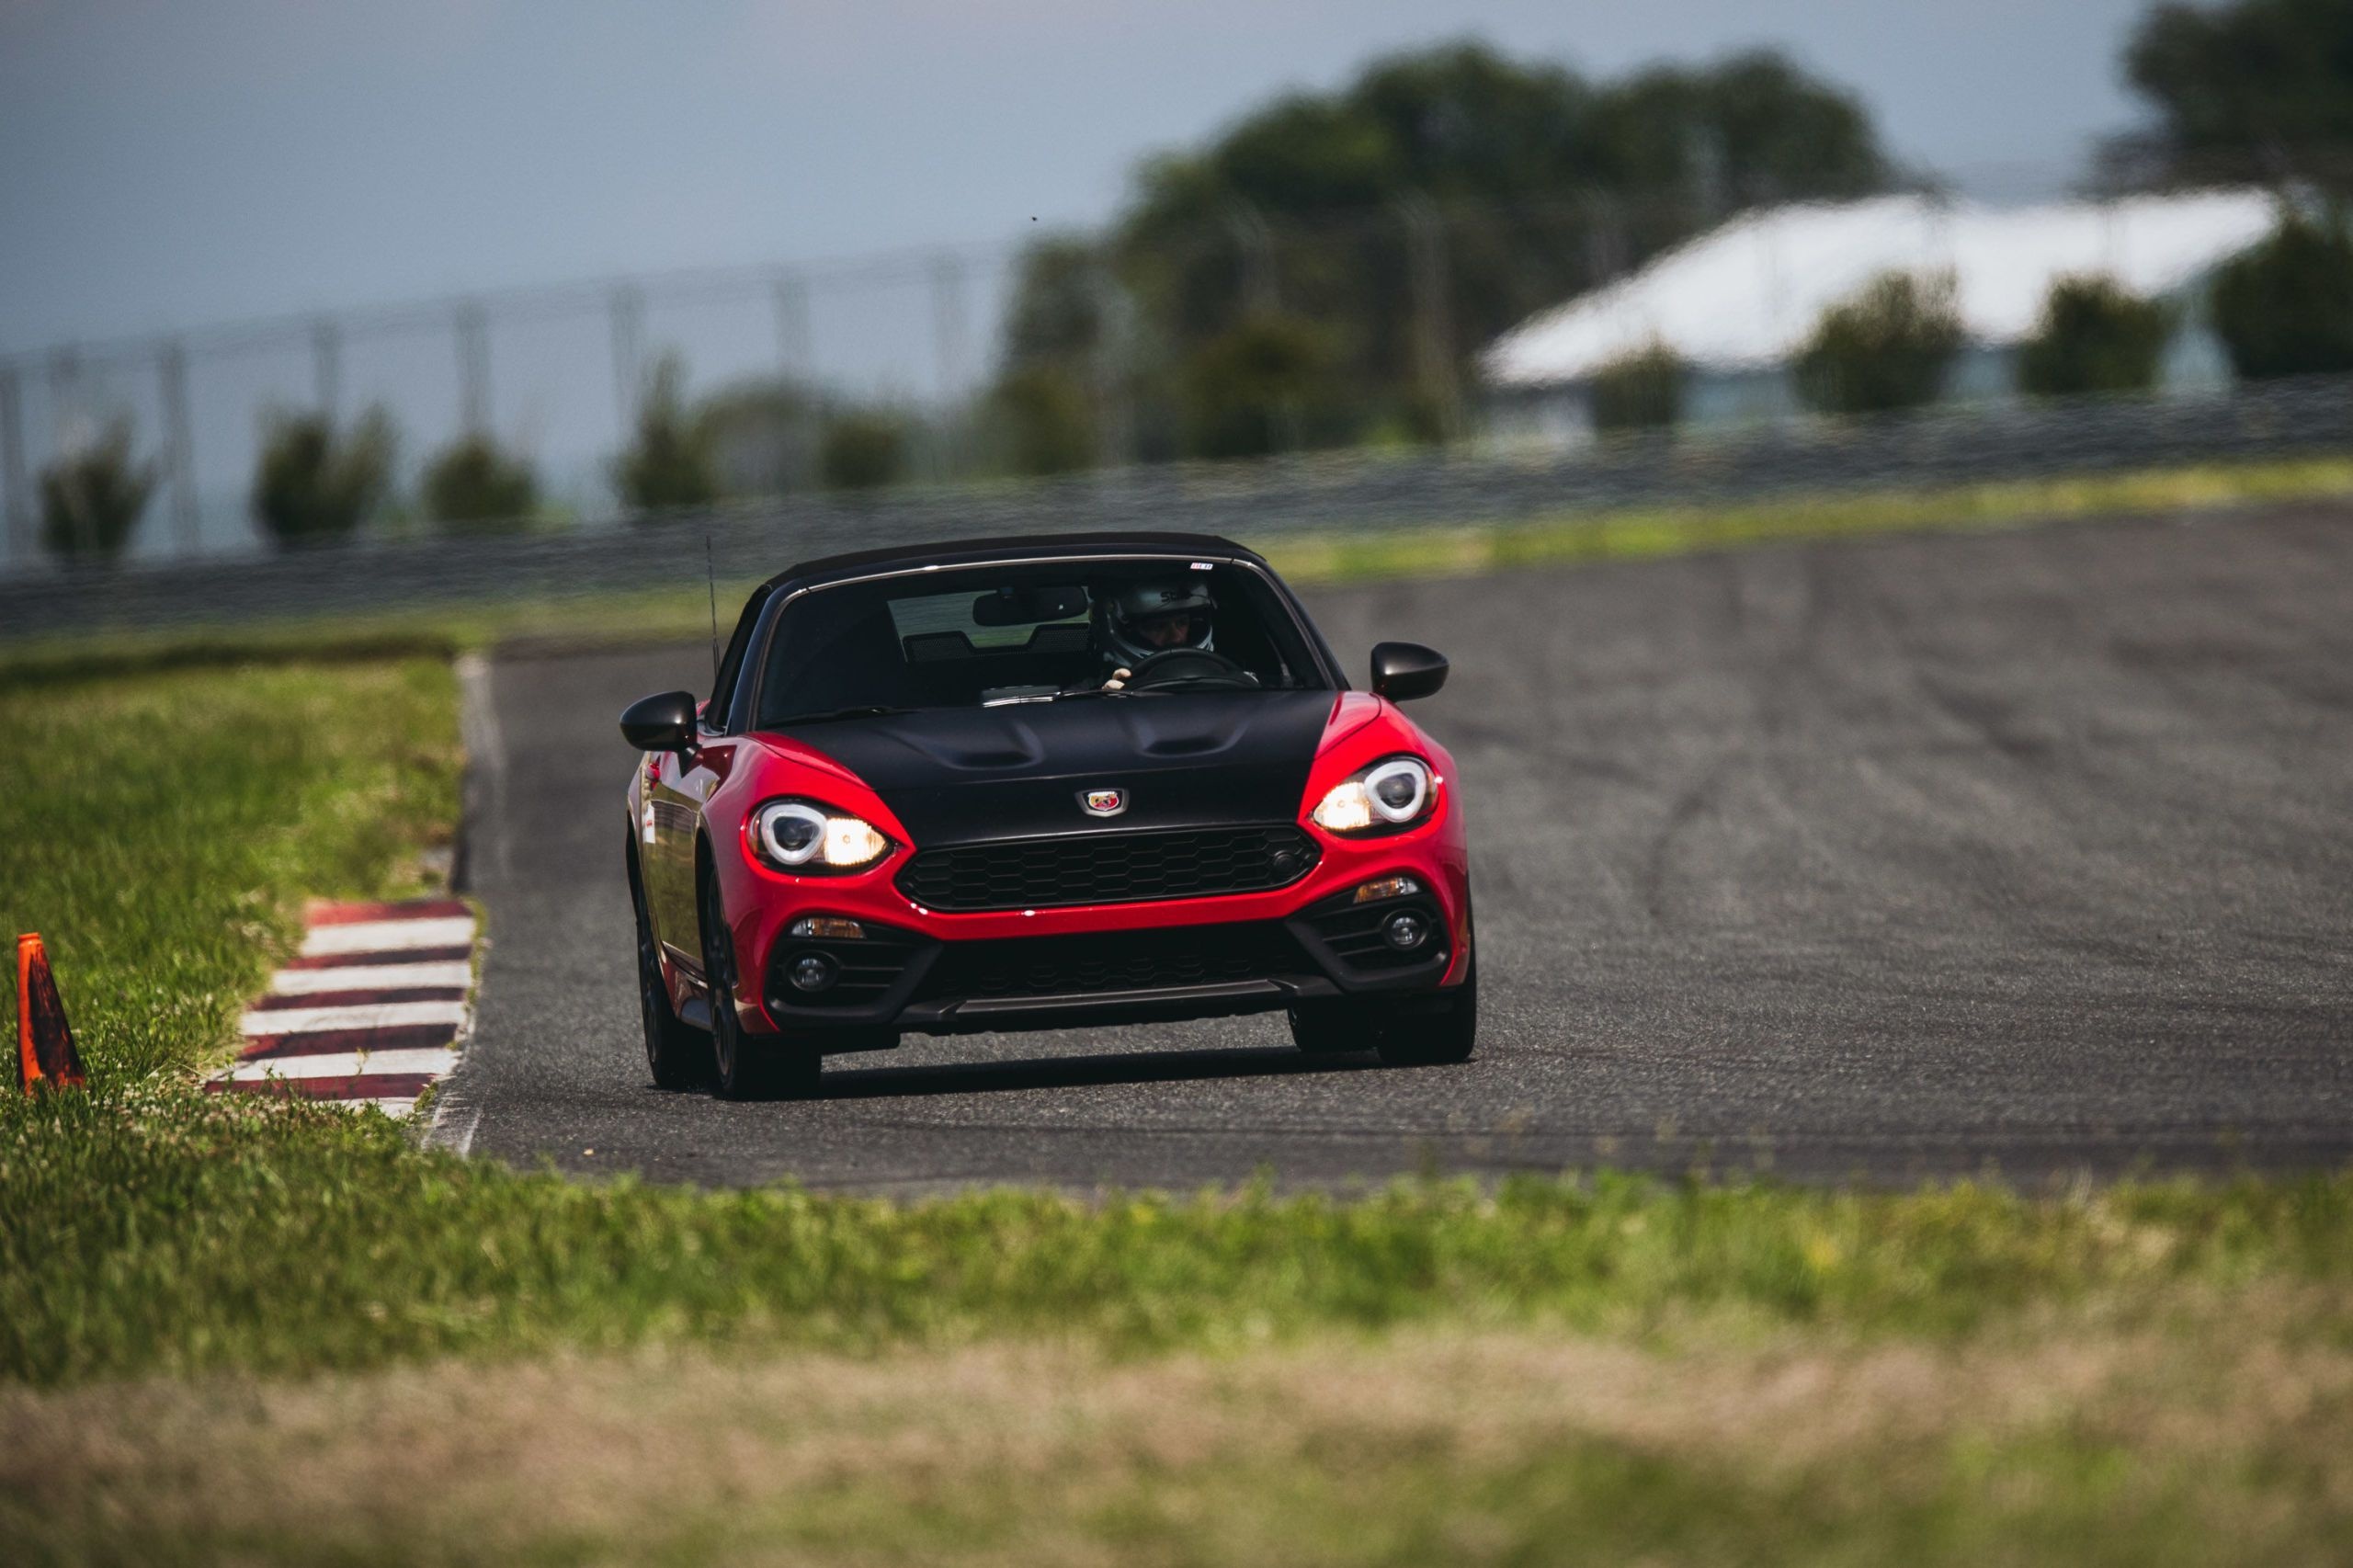 Autocross: Fiat 124 Spider Abarth, A sports car with a turbocharged engine, Autoslalom event. 2560x1710 HD Wallpaper.